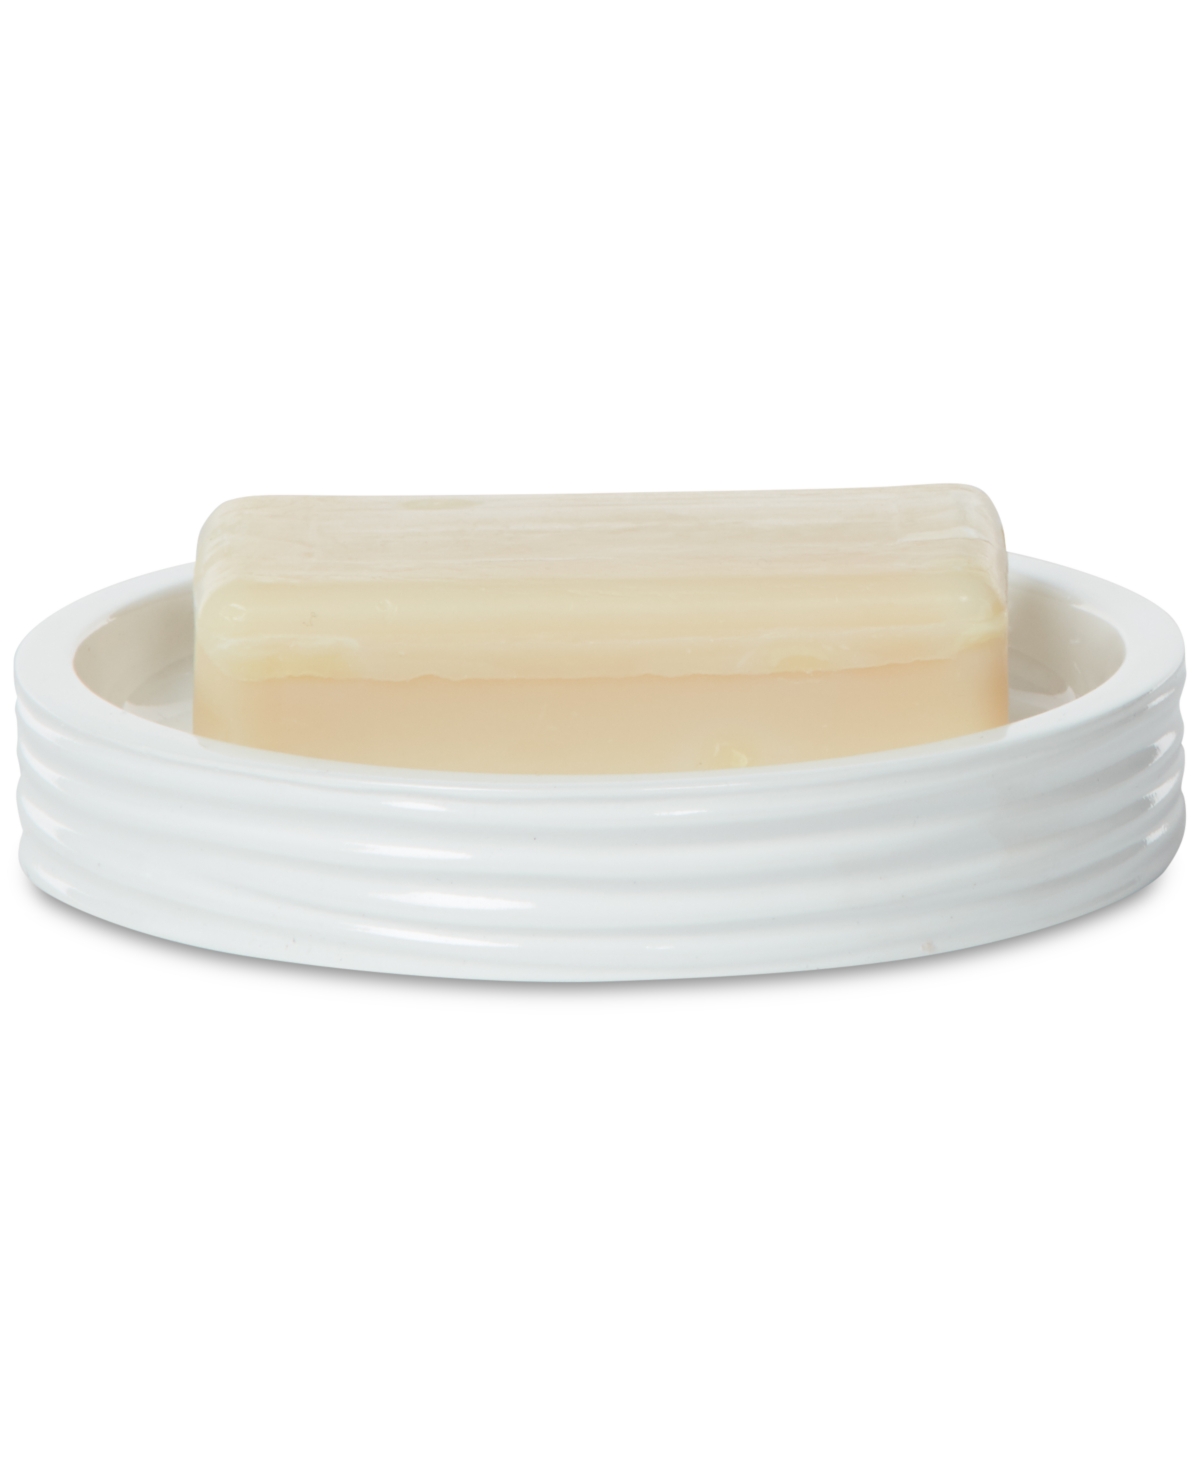 By The Sea Soap Dish - White